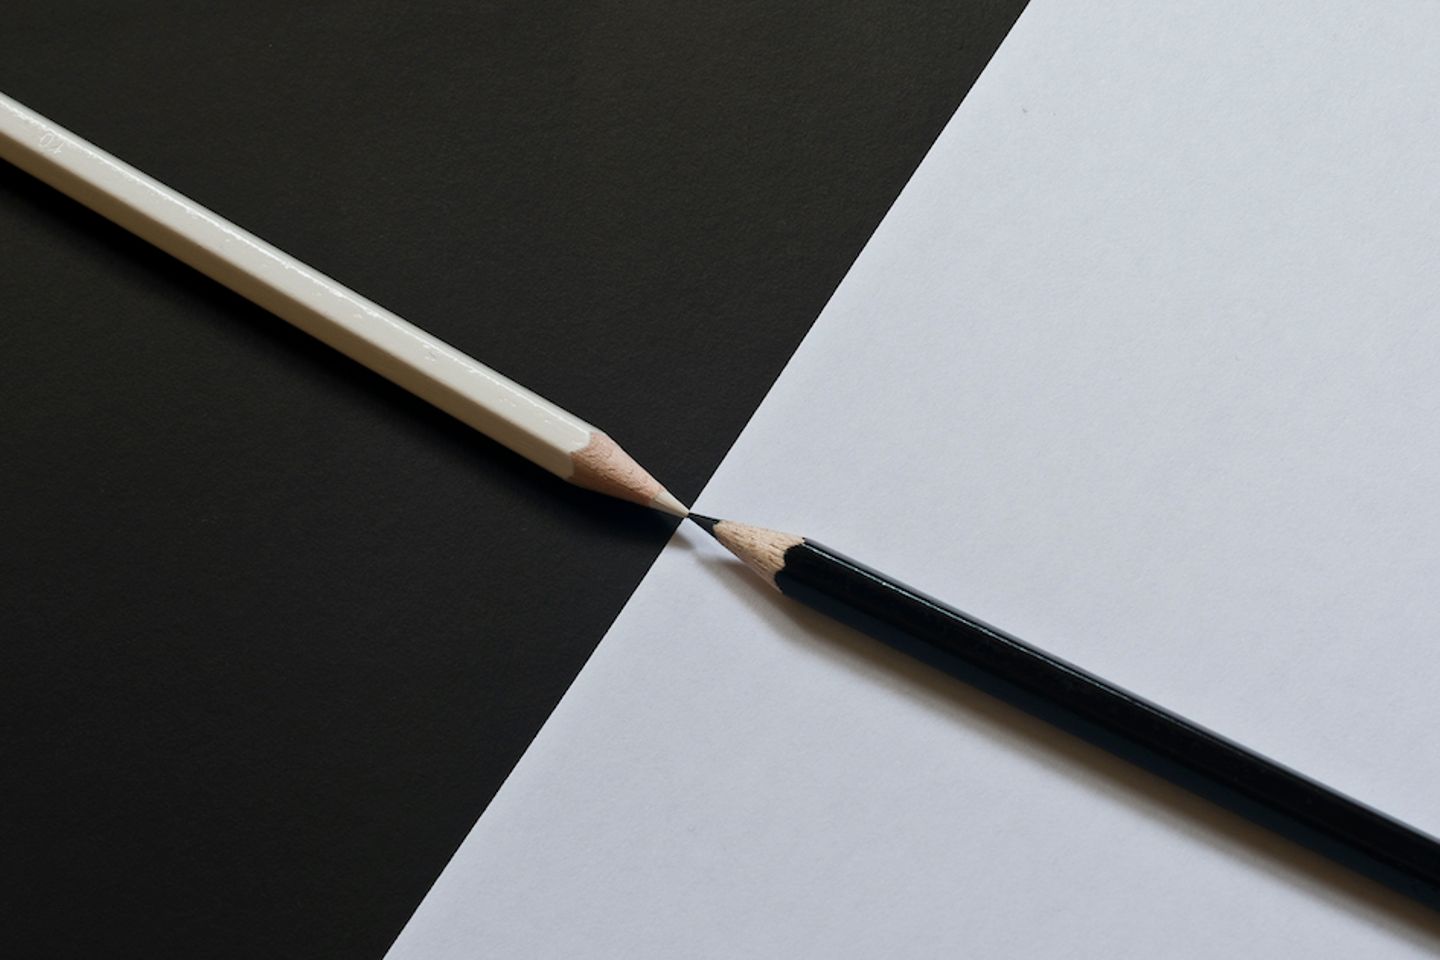 a white pen and a black pen touch